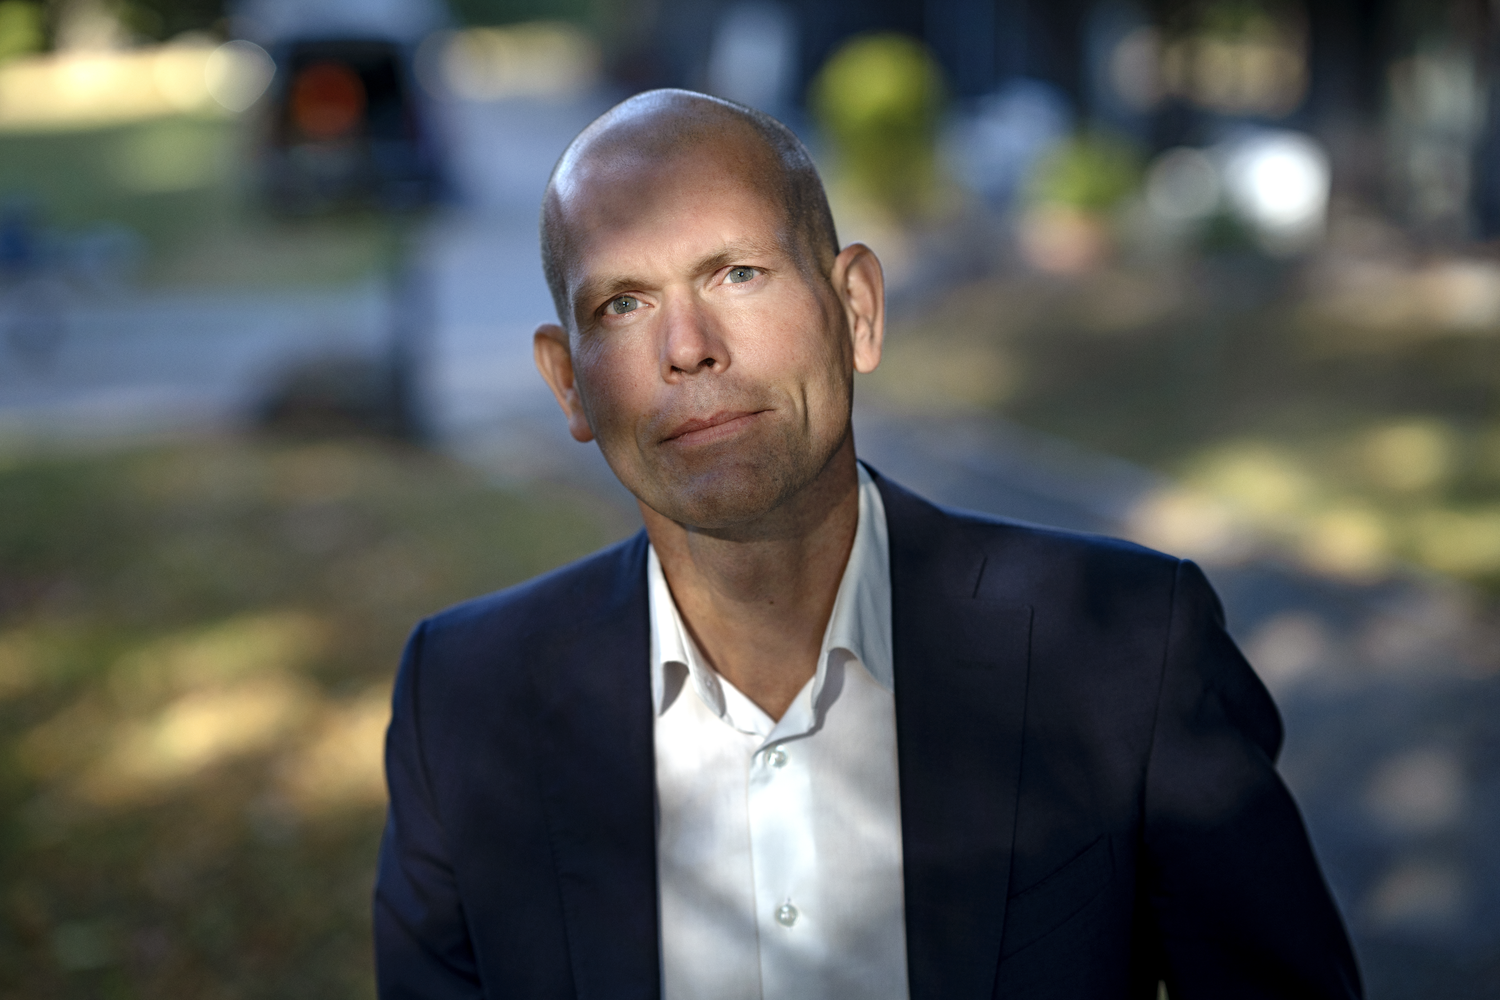 <p>Interview about the ObsERV model with Per Norlén</p>